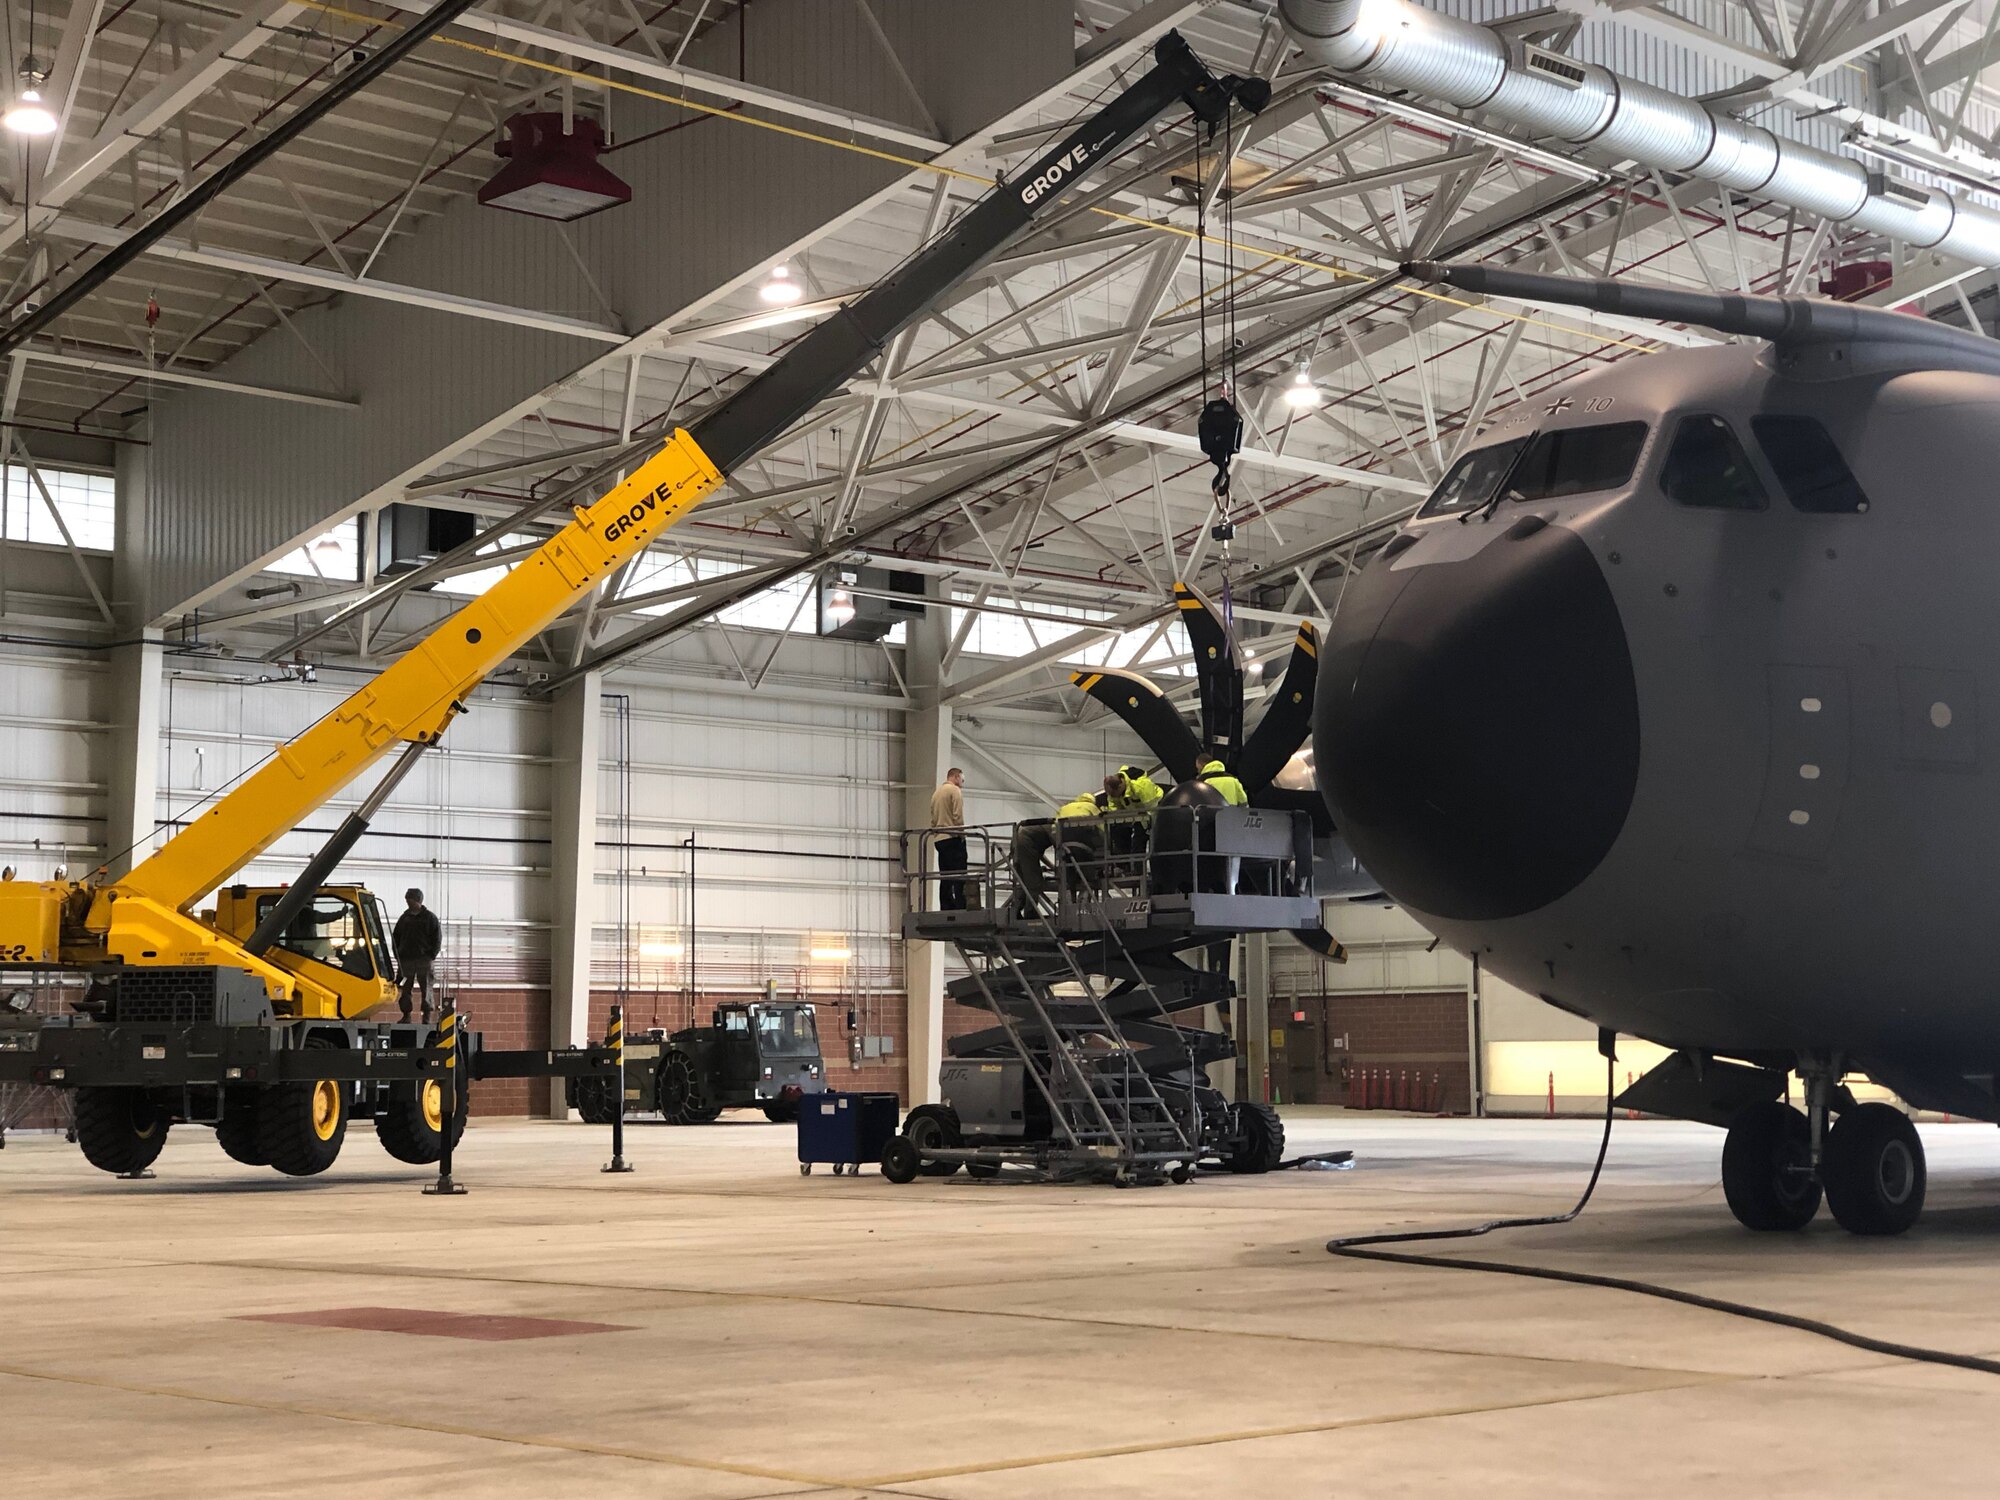 A German Airbus A400M assigned to the 62nd Air Transport Wing of the German Air Force, undergoes a maintenance procedure in a hangar at the 167th Airlift Wing, Martinsburg, W.Va., Feb. 24.